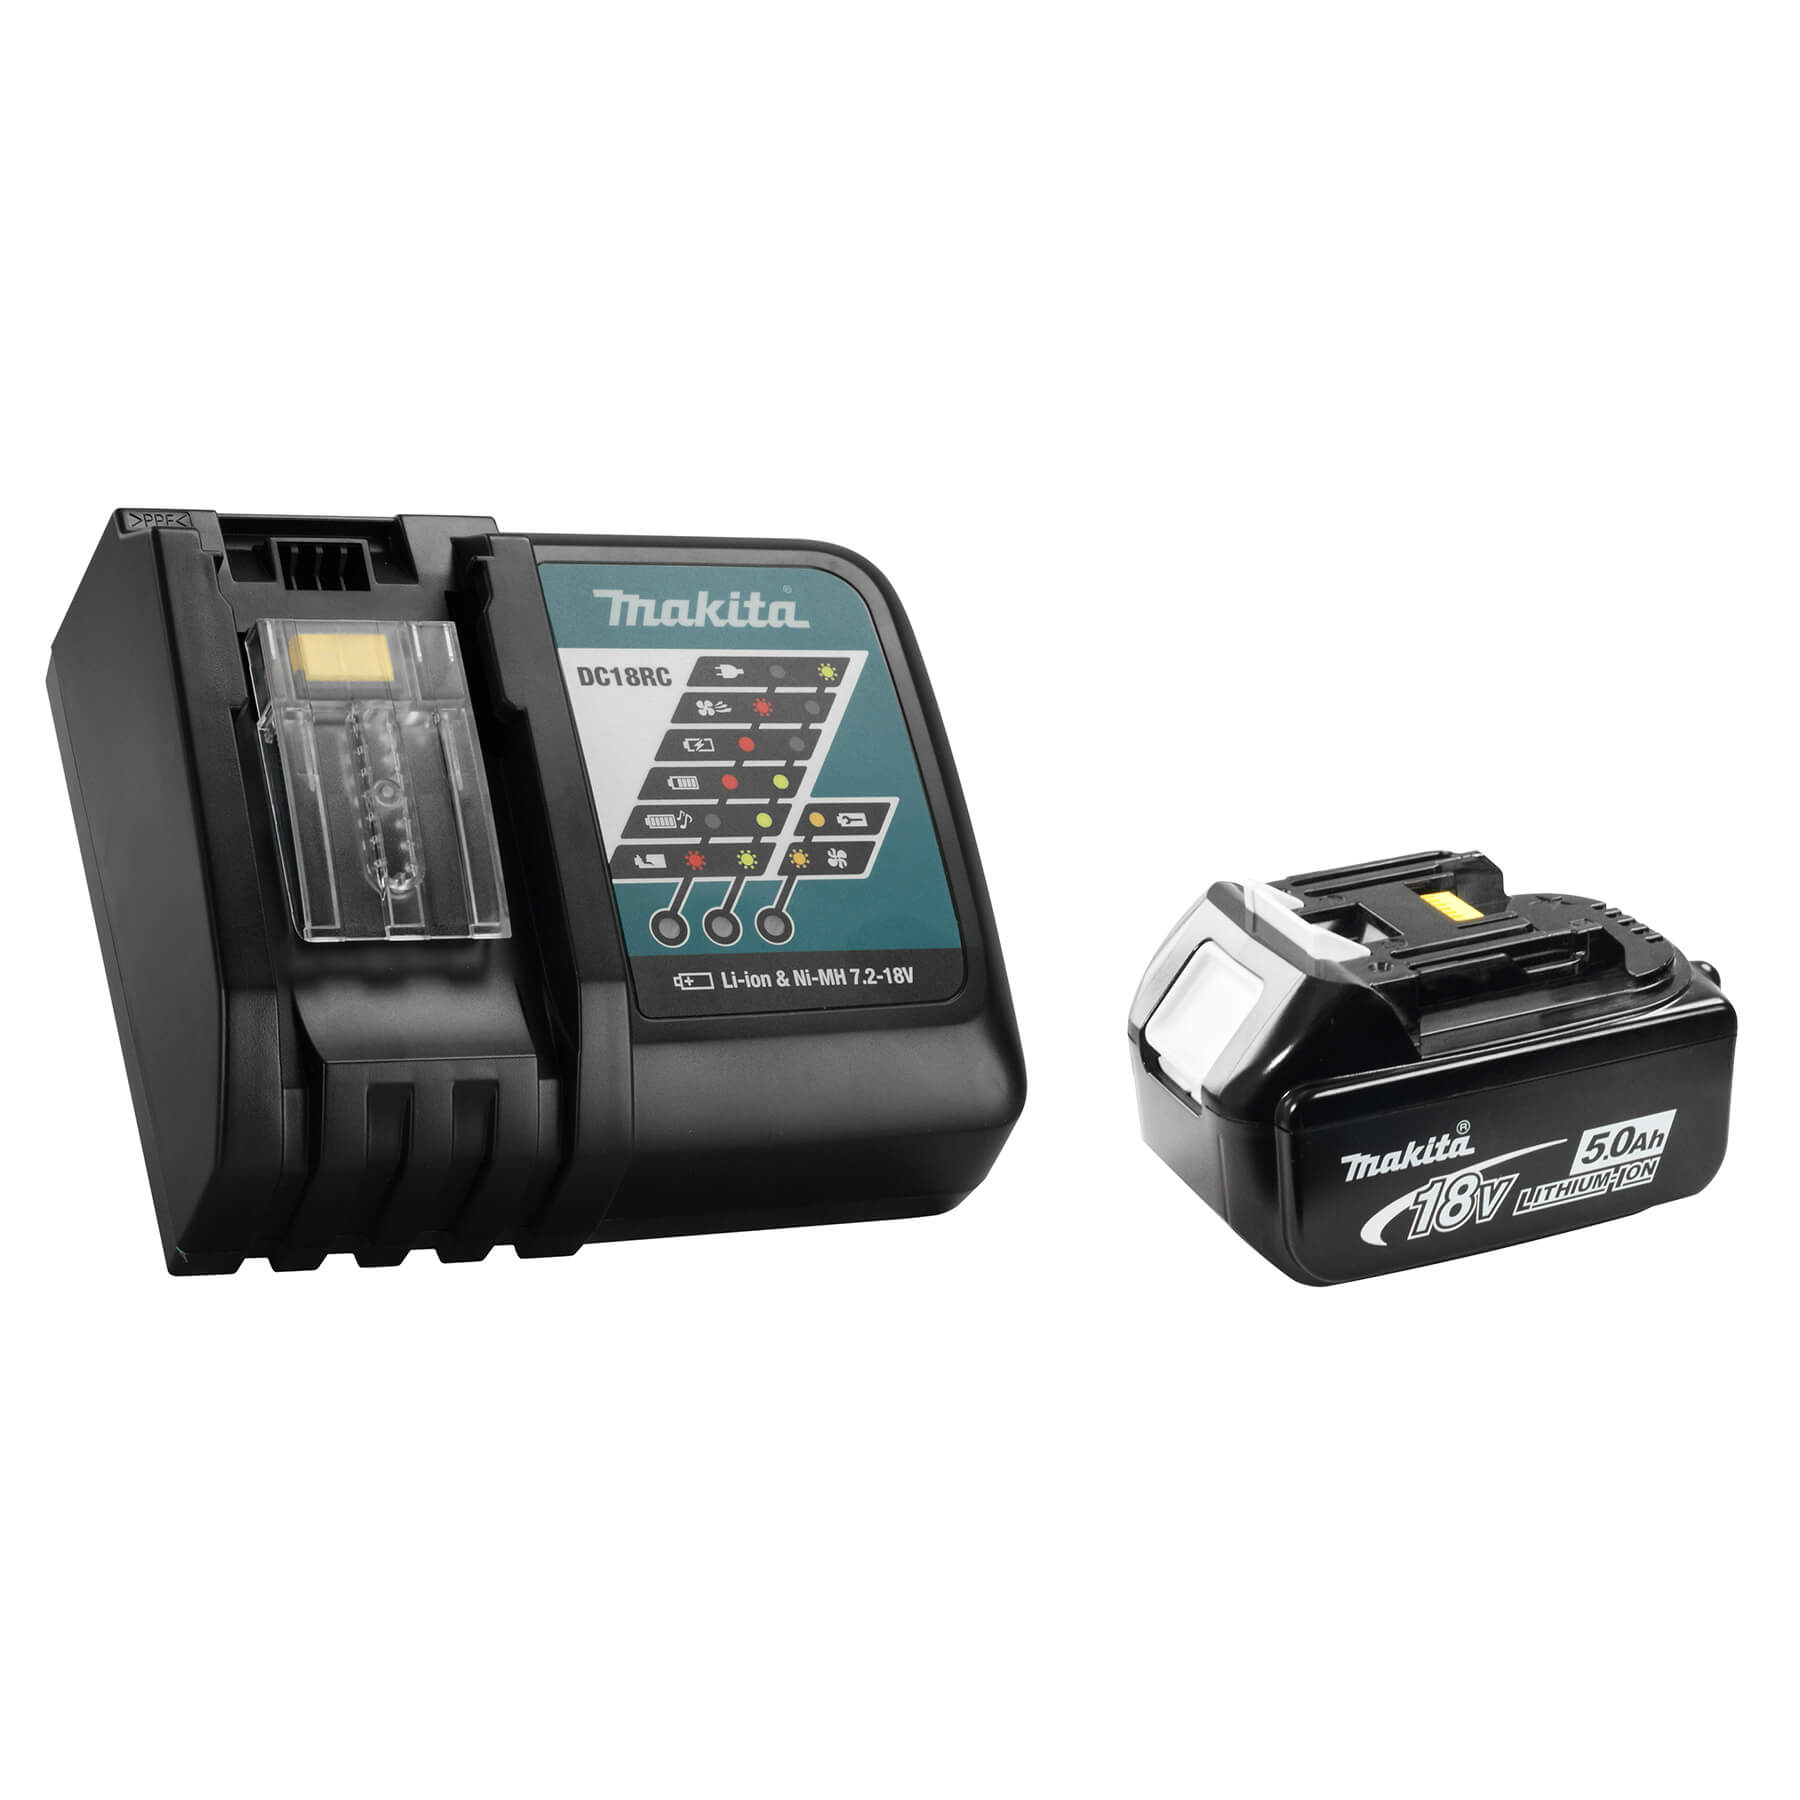 Makita Y-00309 - 18V Rapid Charger & 5.0Ah Battery Combo - wise-line-tools